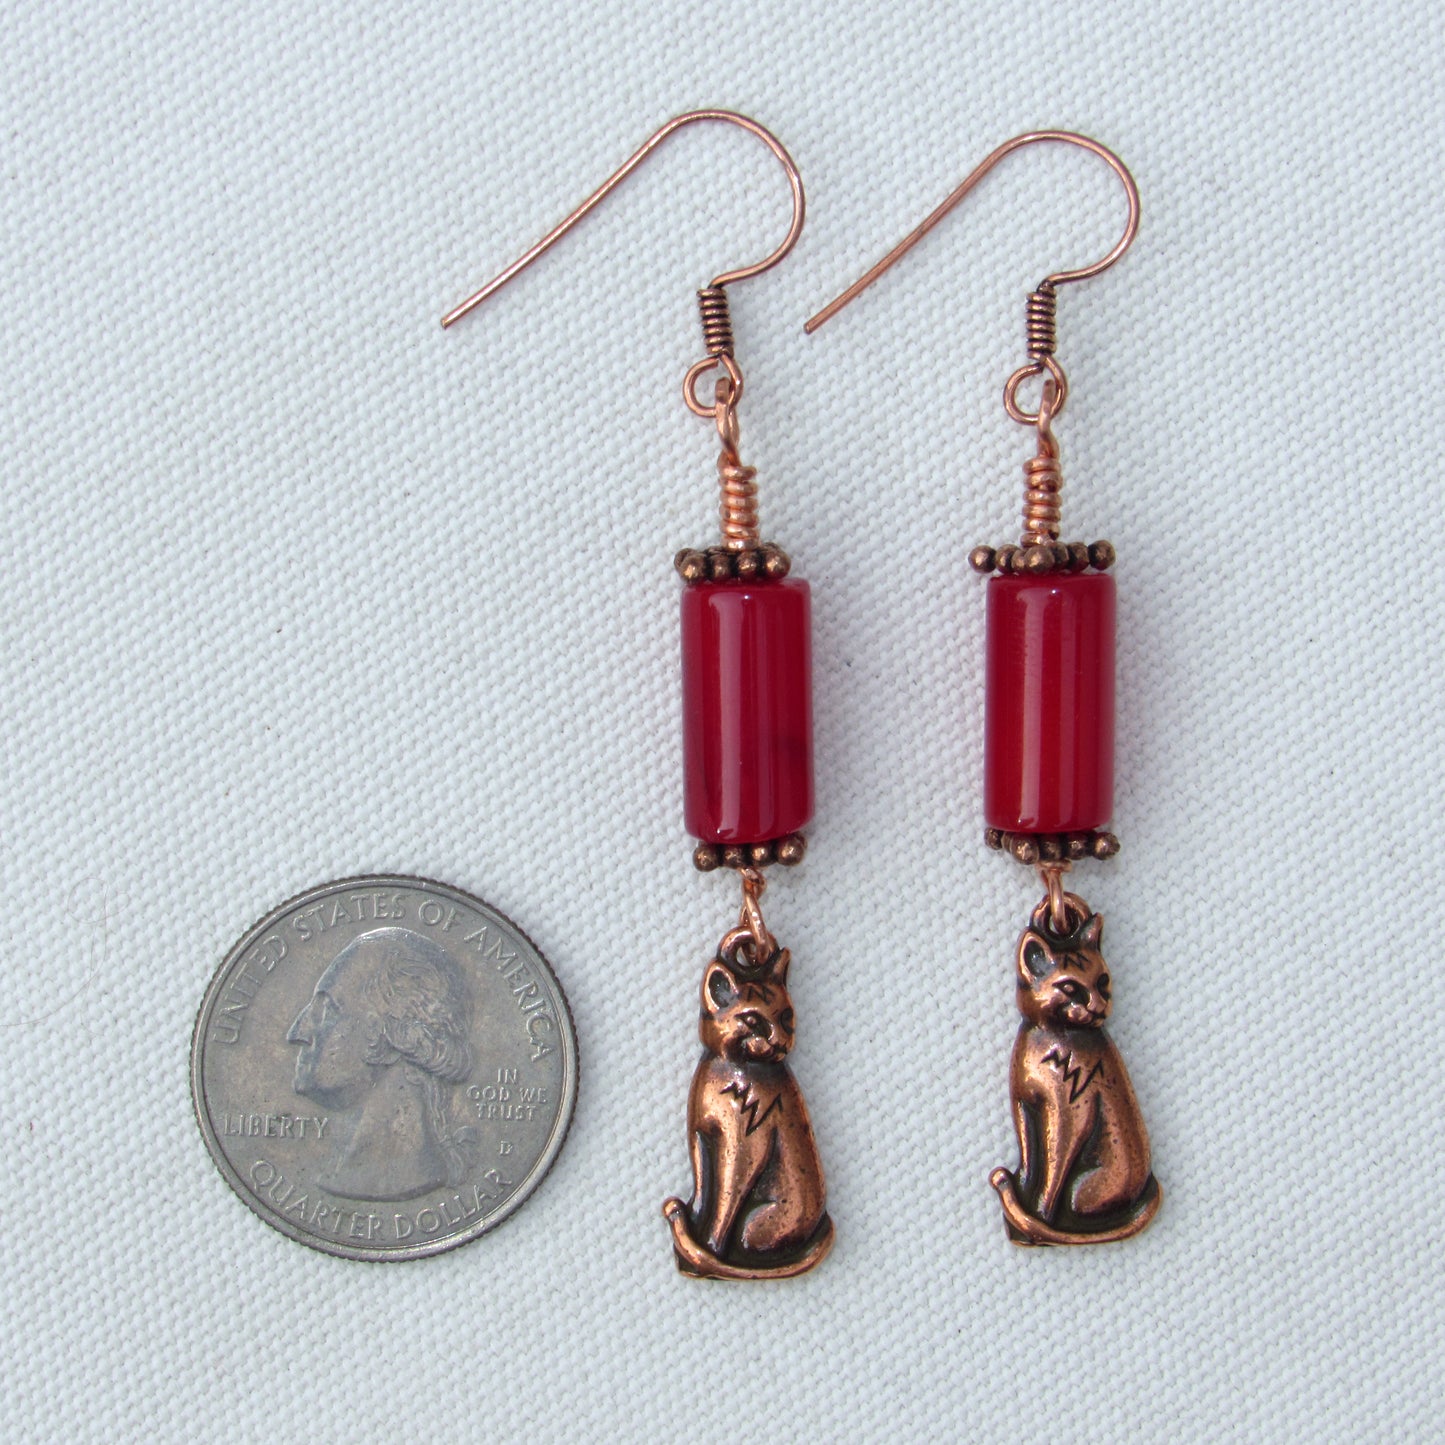 Red Agate gemstone and Copper Kitty Cat Drop Earrings